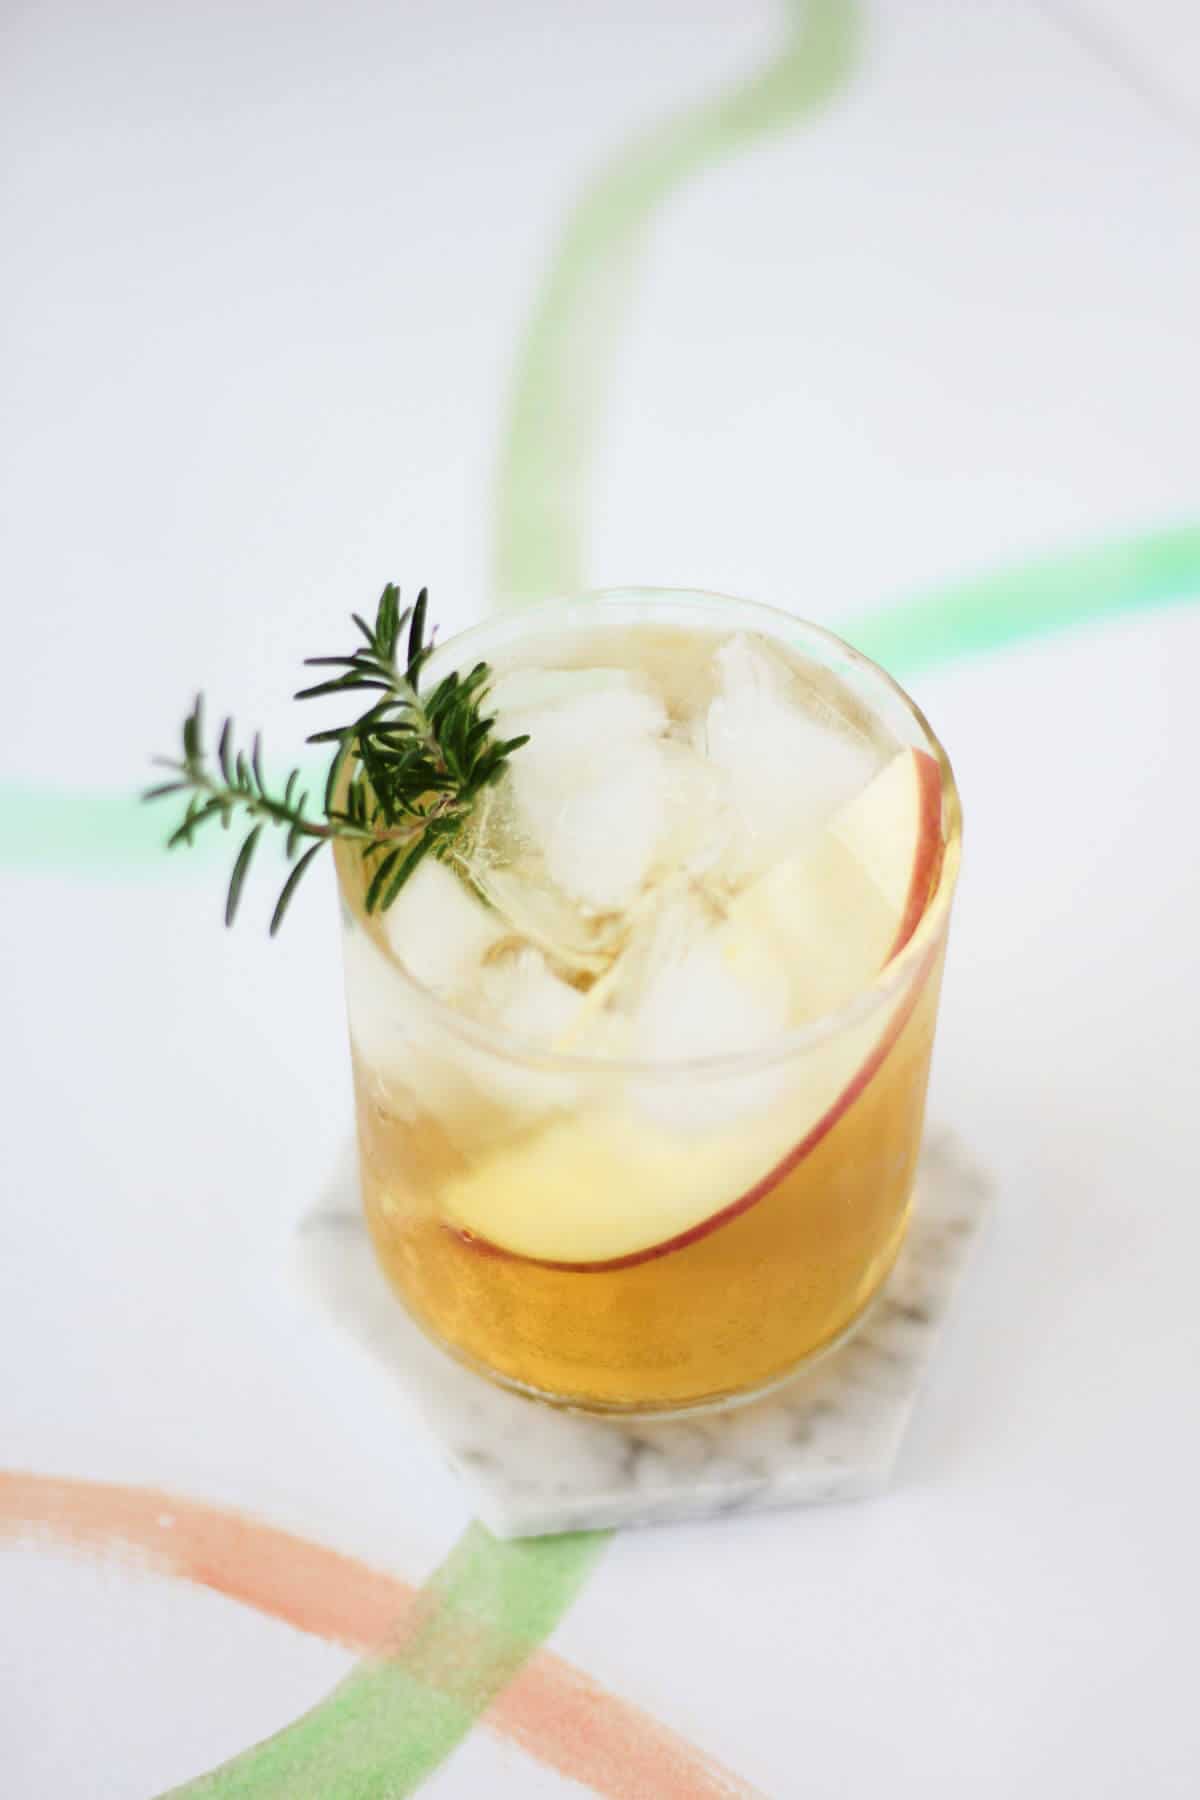 Clear glass filled with golden yellow liquid, a slice of apple and a sprig of rosemary.